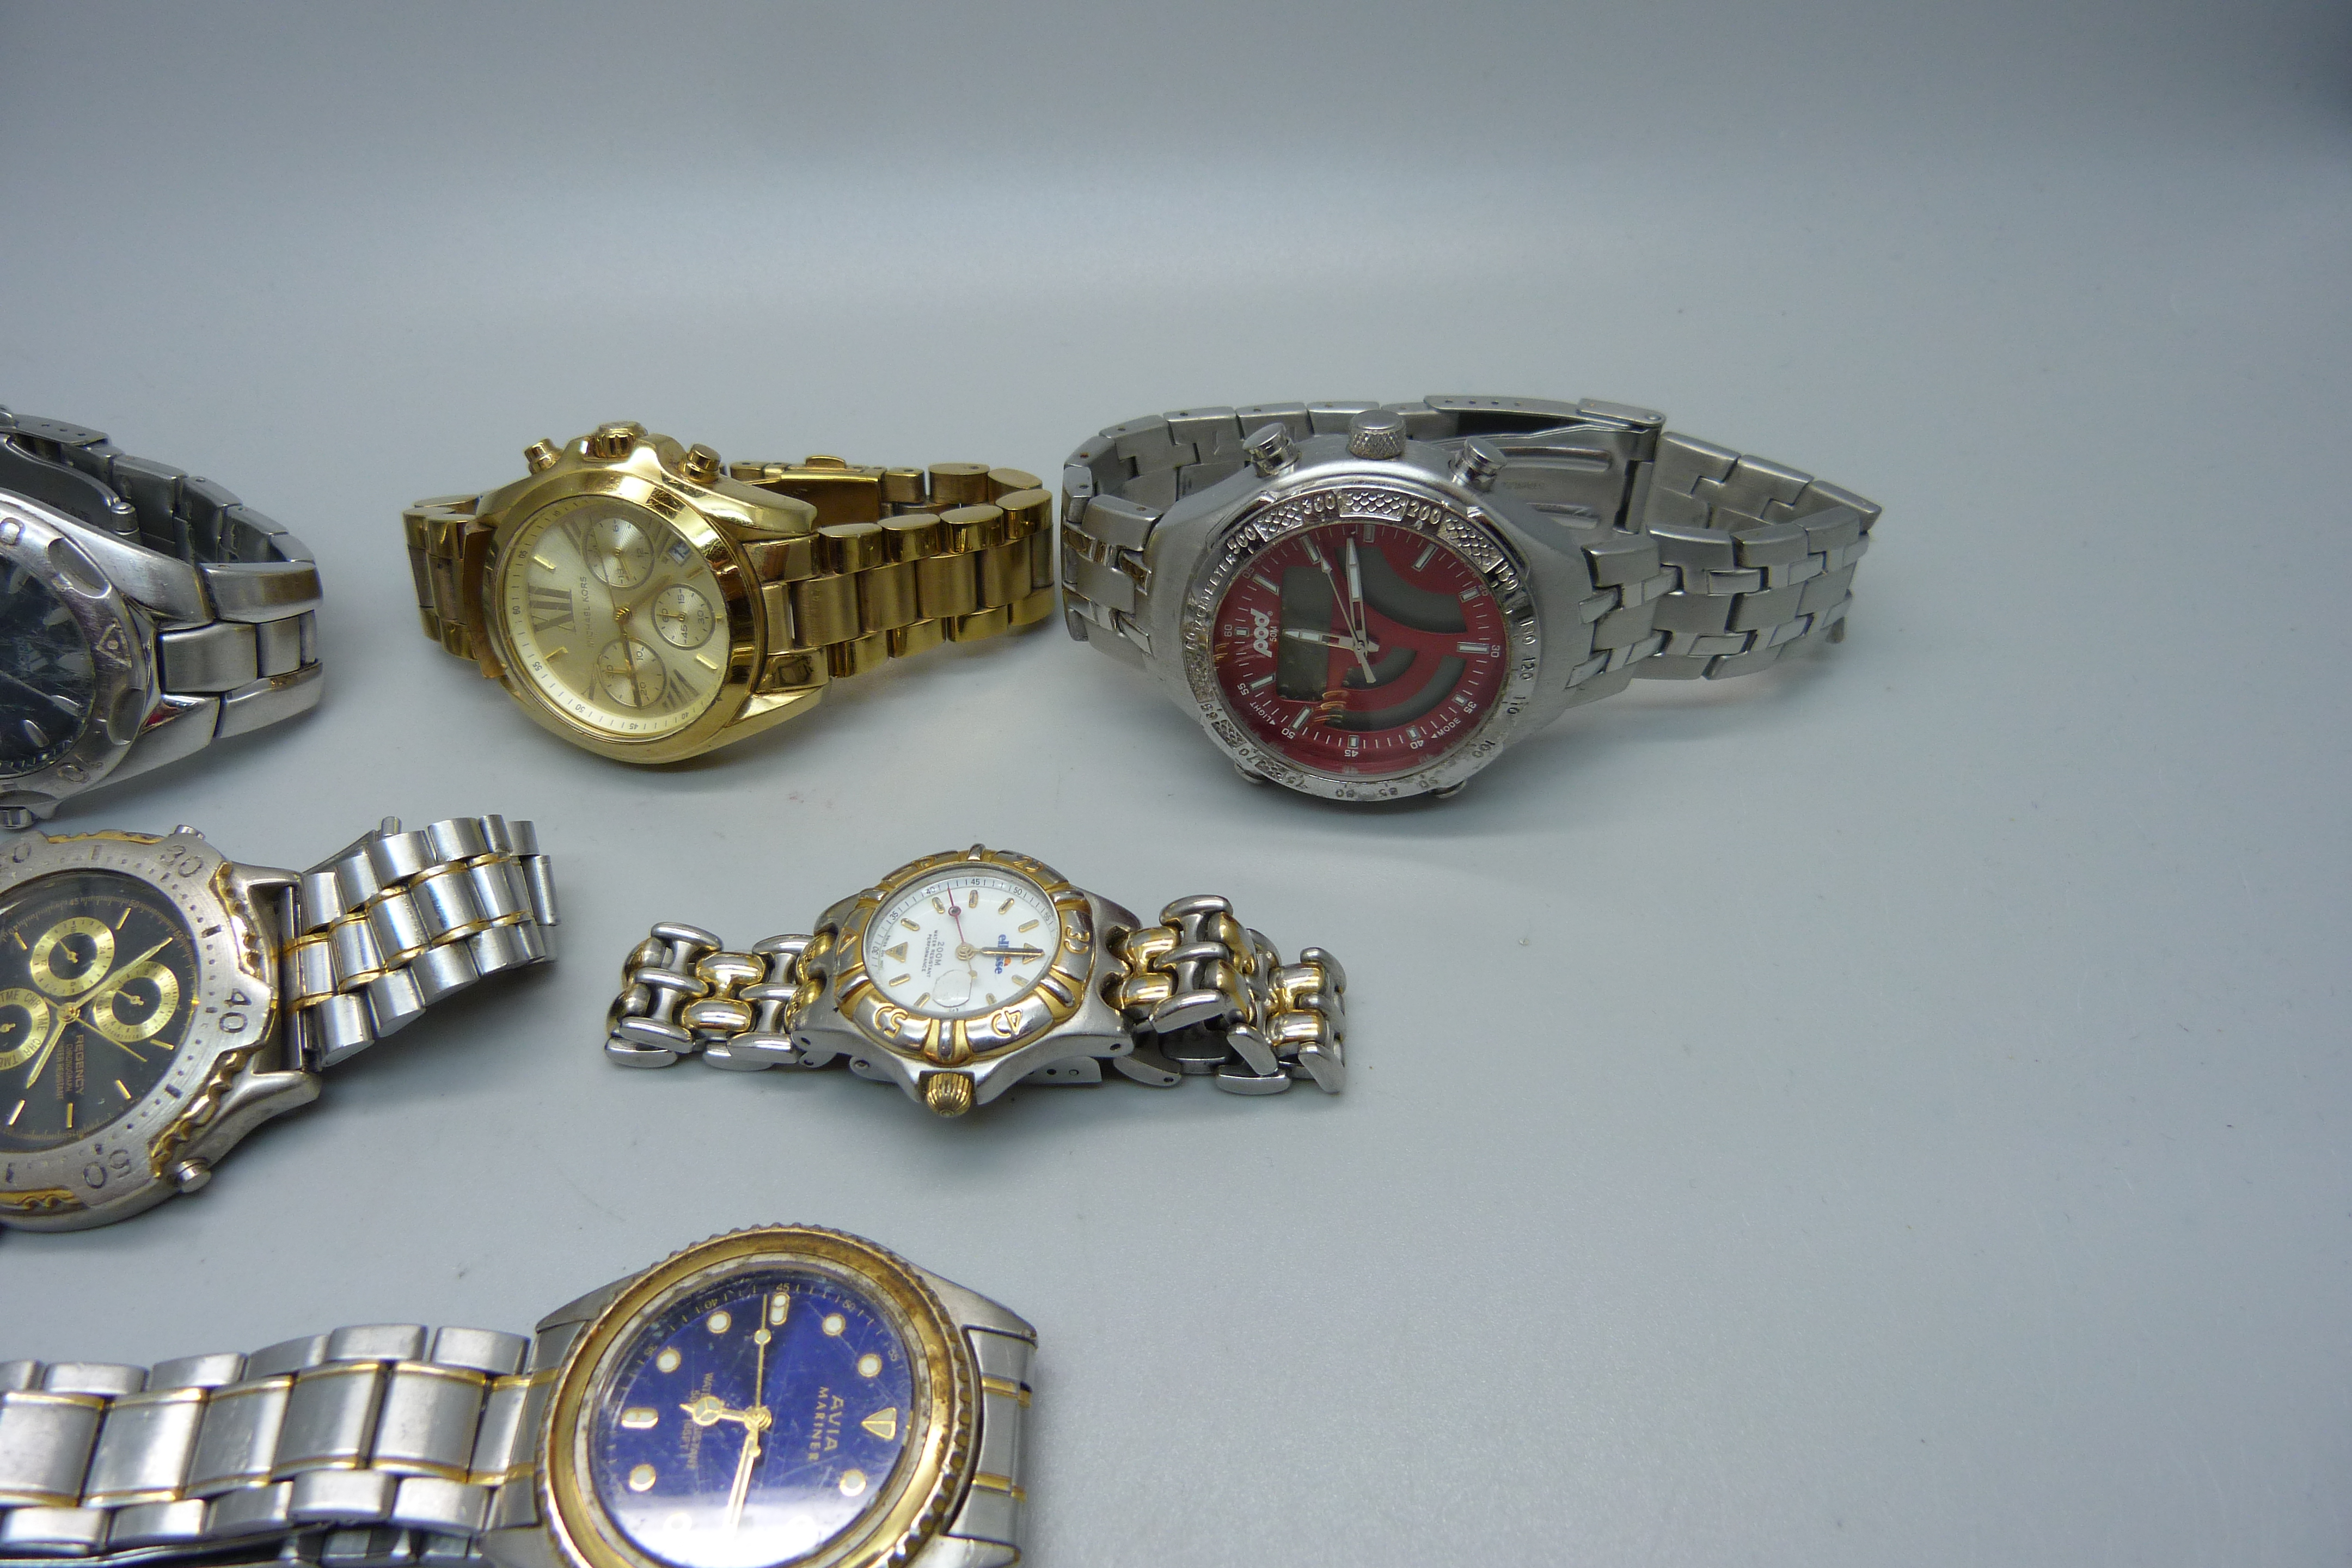 Six wristwatches including Ellese 200m diver's watch, Michael Kors, Avia Mariner, Pod Chronograph, - Image 3 of 3